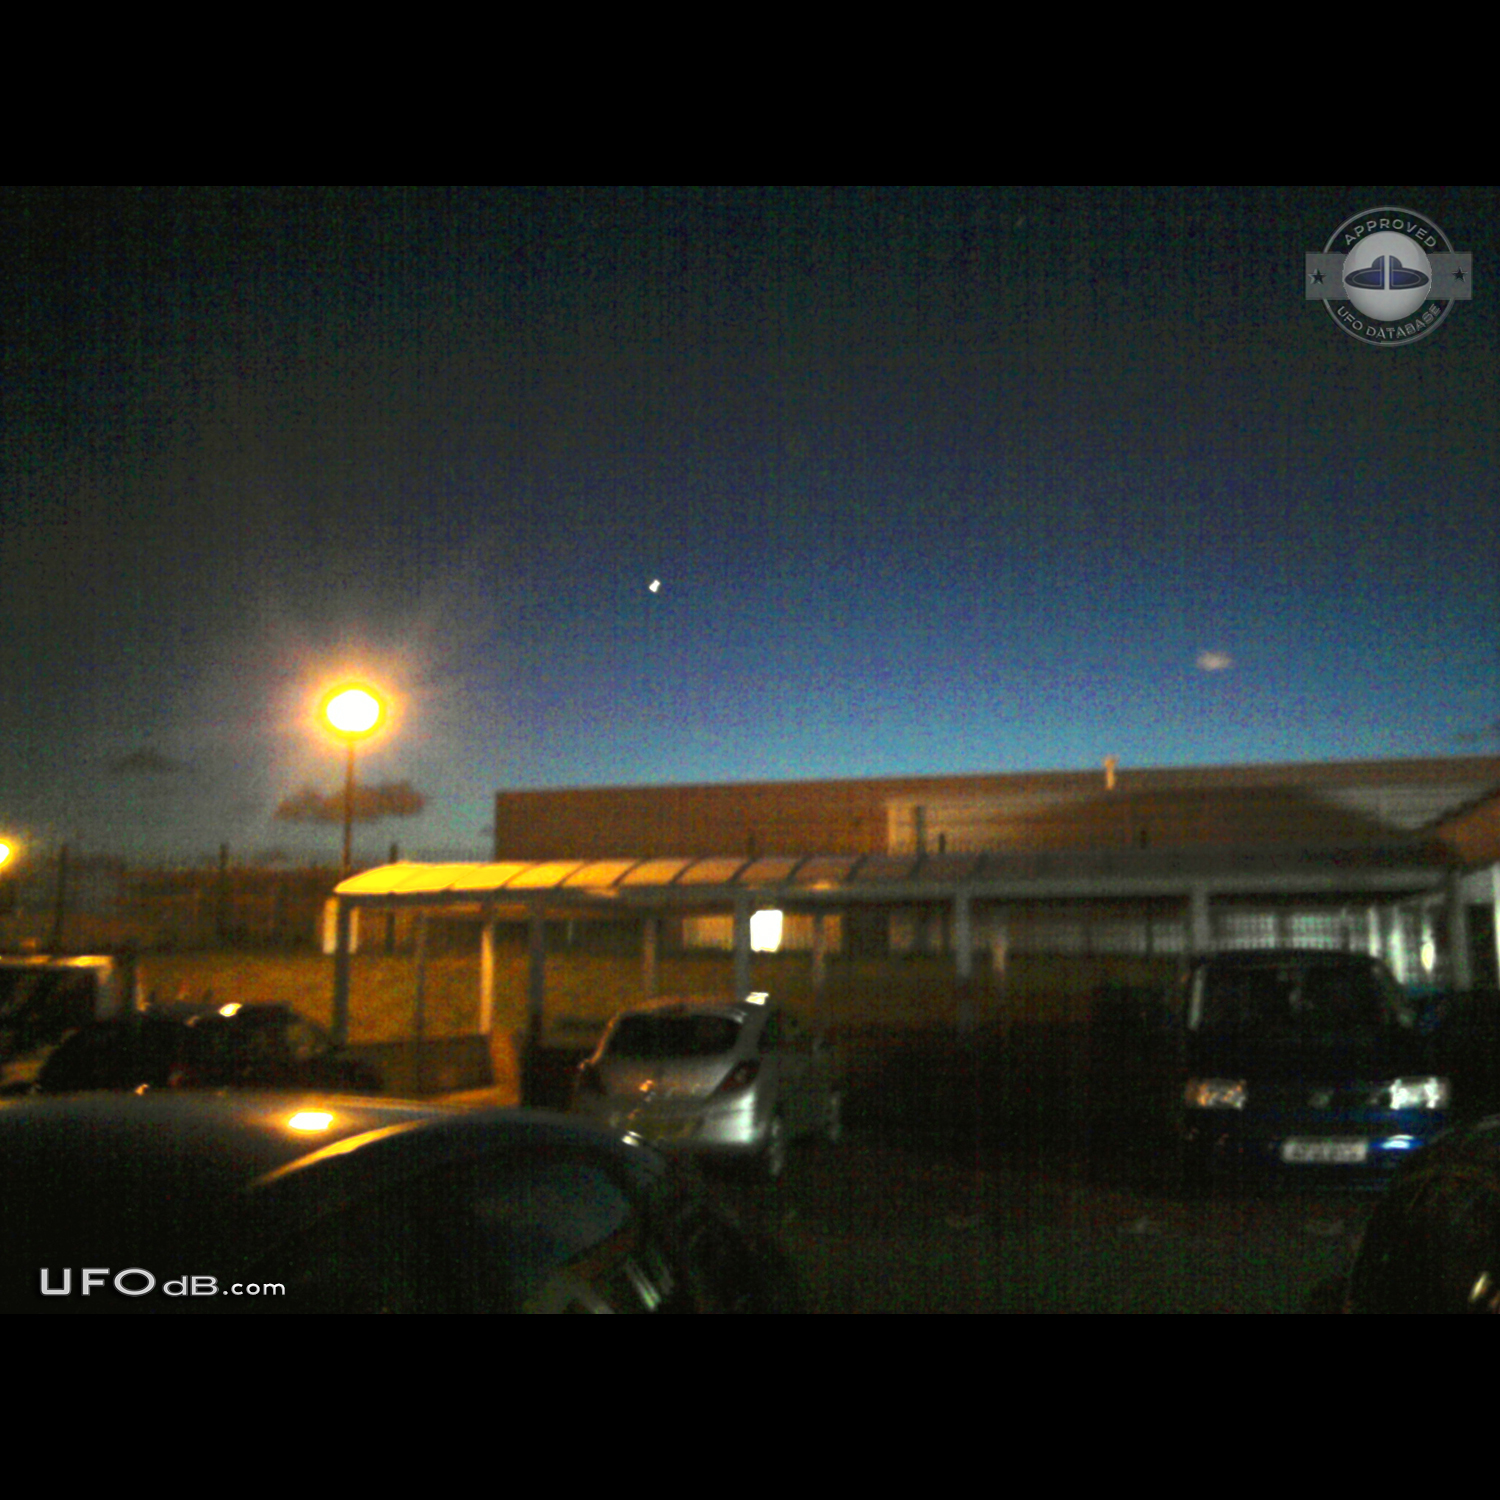 UFO sightings happen in many occasion over Liverpool, England - 2012 UFO Picture #451-1